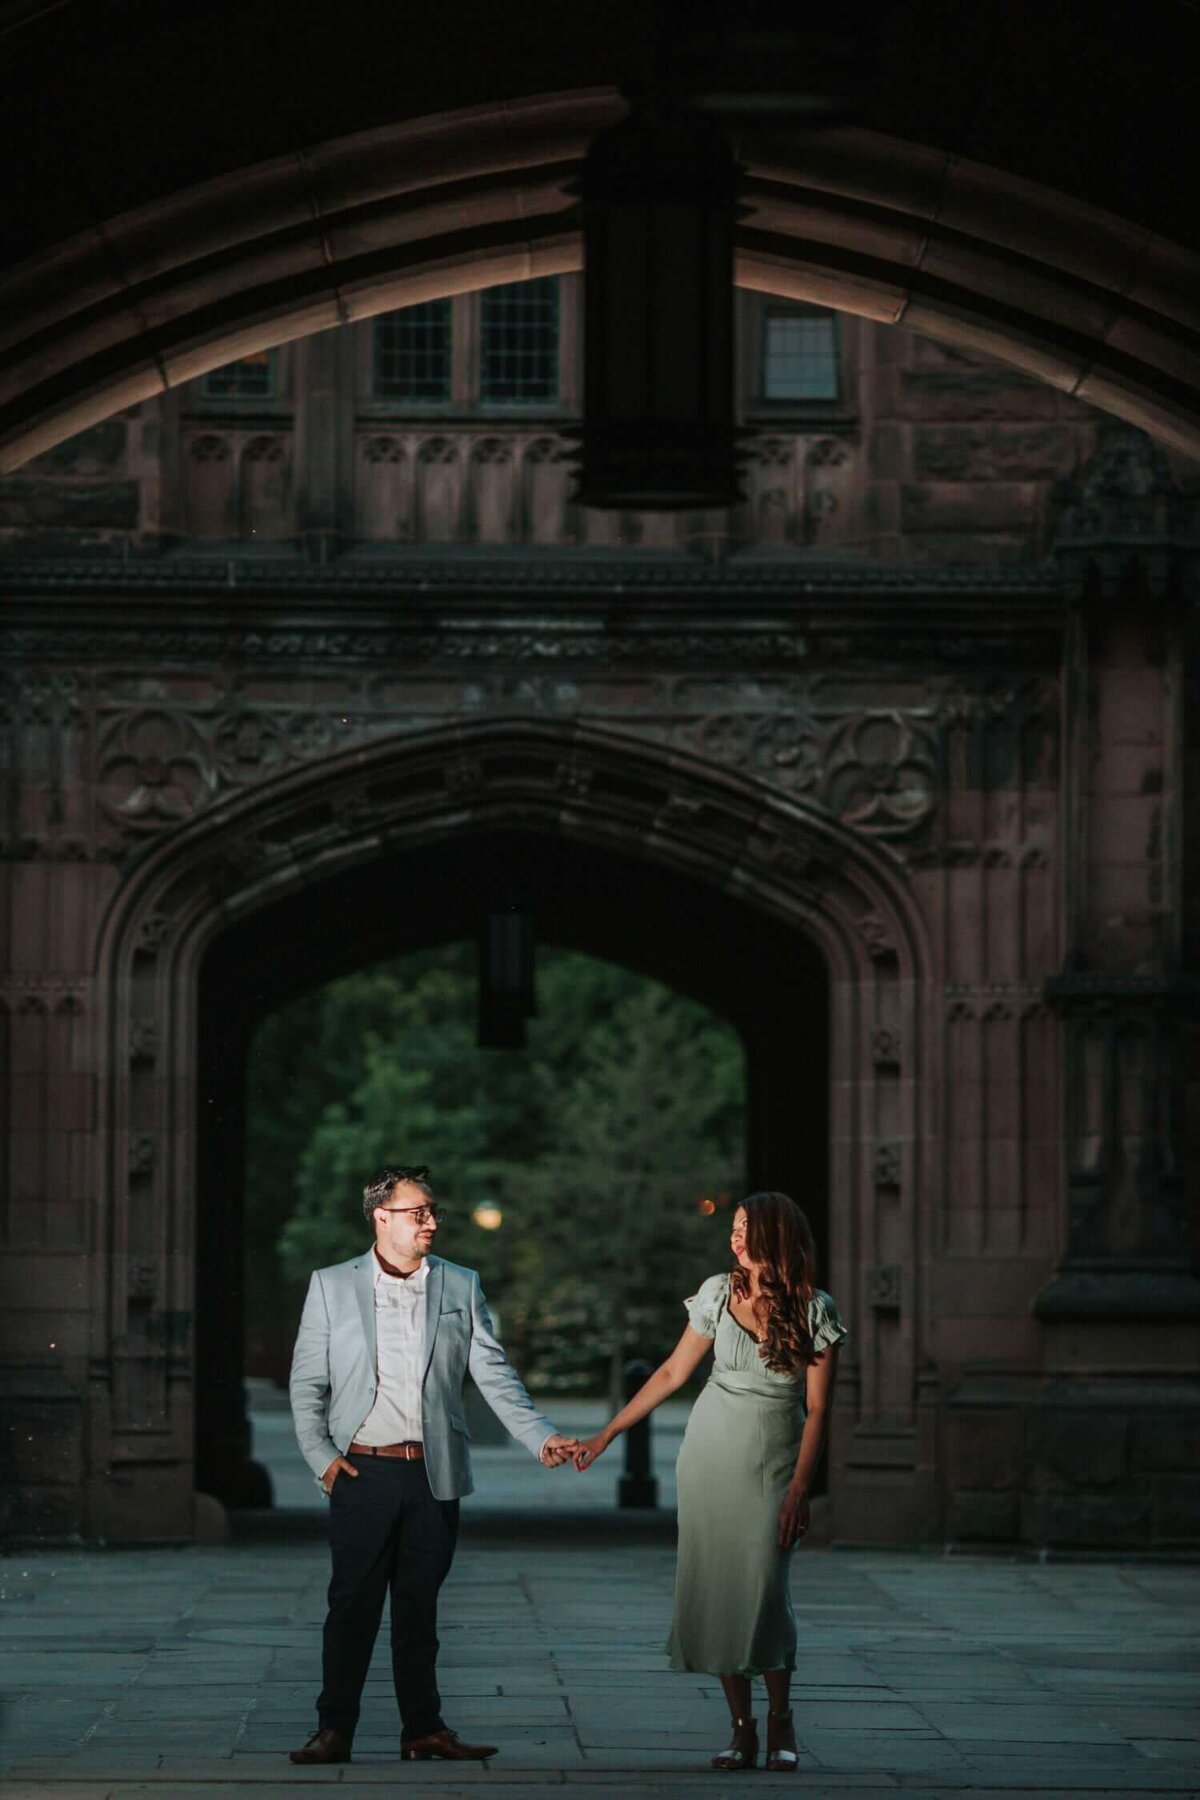 Couple holding hands standing in front of an arched walkway in Princeton New Jersey.